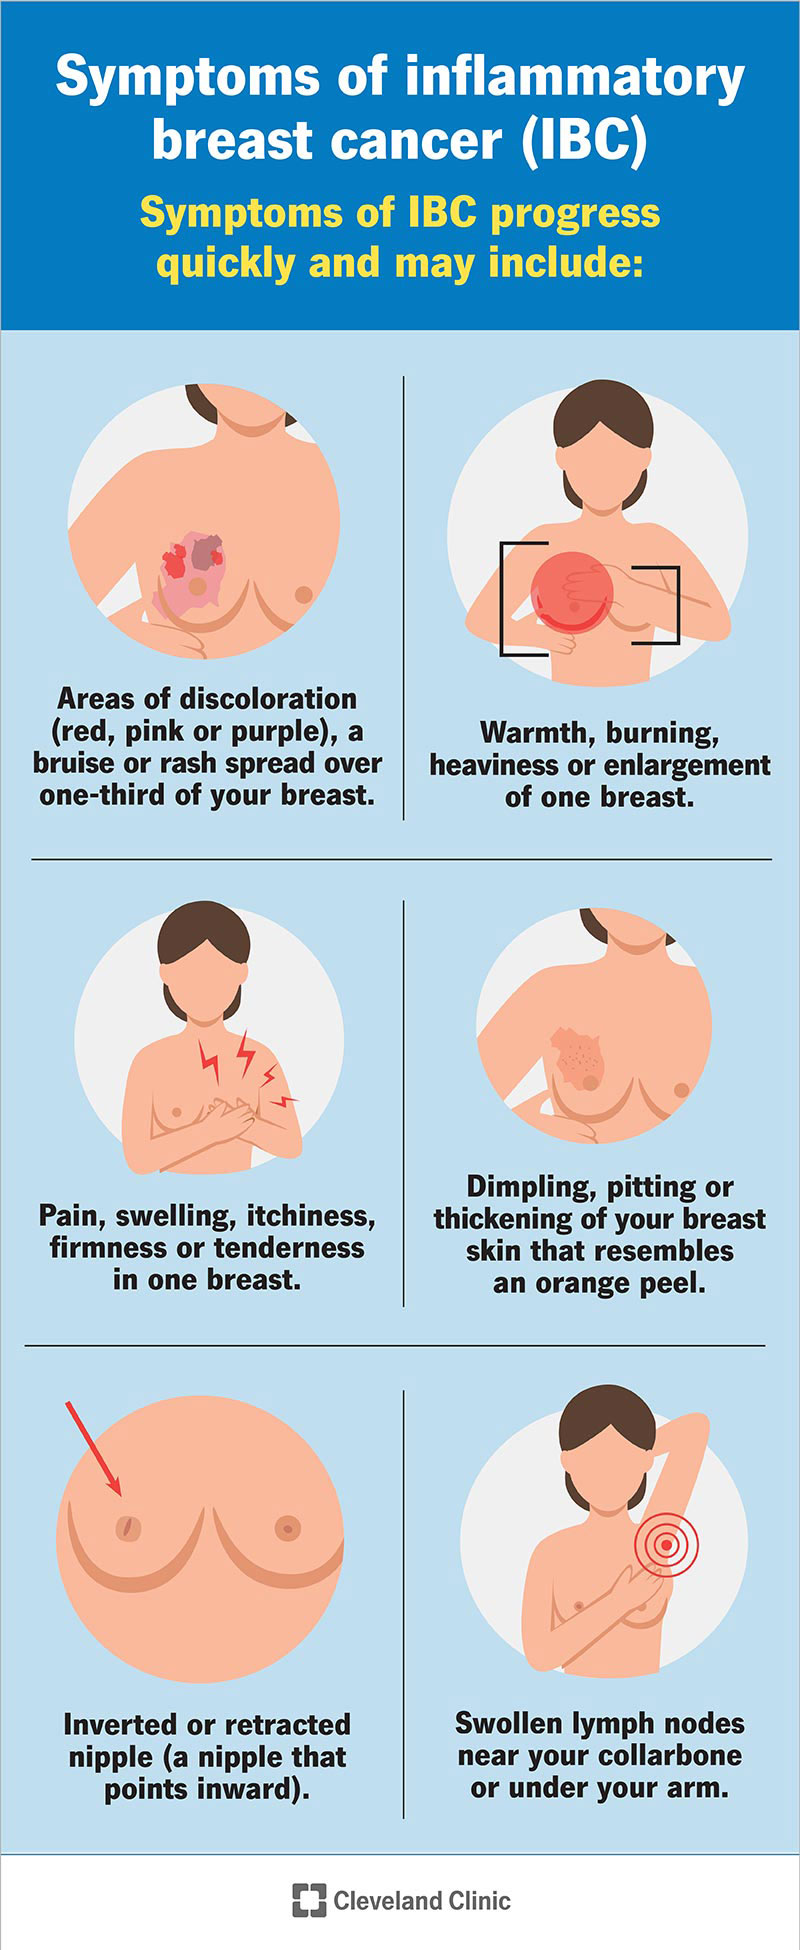 Symptoms of inflammatory breast cancer progress quickly and include changes to your breast skin and nipple.